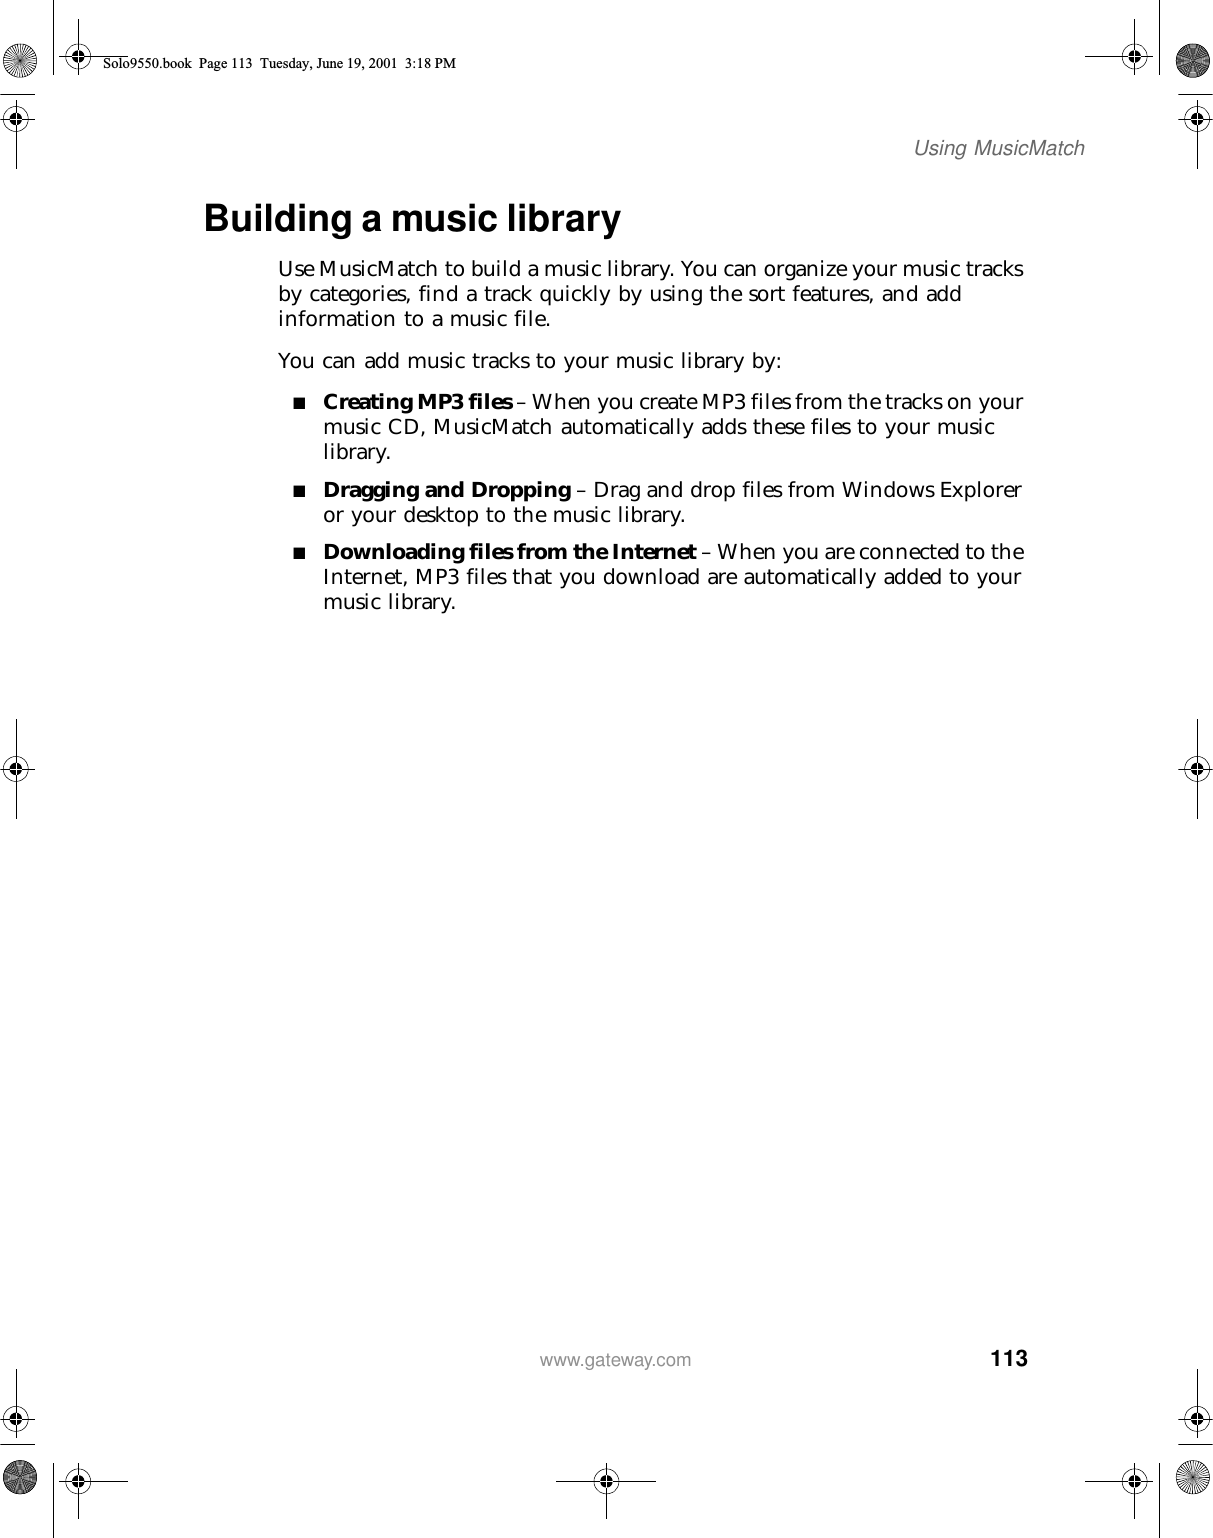 113Using MusicMatchwww.gateway.comBuilding a music libraryUse MusicMatch to build a music library. You can organize your music tracks by categories, find a track quickly by using the sort features, and add information to a music file.You can add music tracks to your music library by:■Creating MP3 files – When you create MP3 files from the tracks on your music CD, MusicMatch automatically adds these files to your music library.■Dragging and Dropping – Drag and drop files from Windows Explorer or your desktop to the music library.■Downloading files from the Internet – When you are connected to the Internet, MP3 files that you download are automatically added to your music library.Solo9550.book Page 113 Tuesday, June 19, 2001 3:18 PM